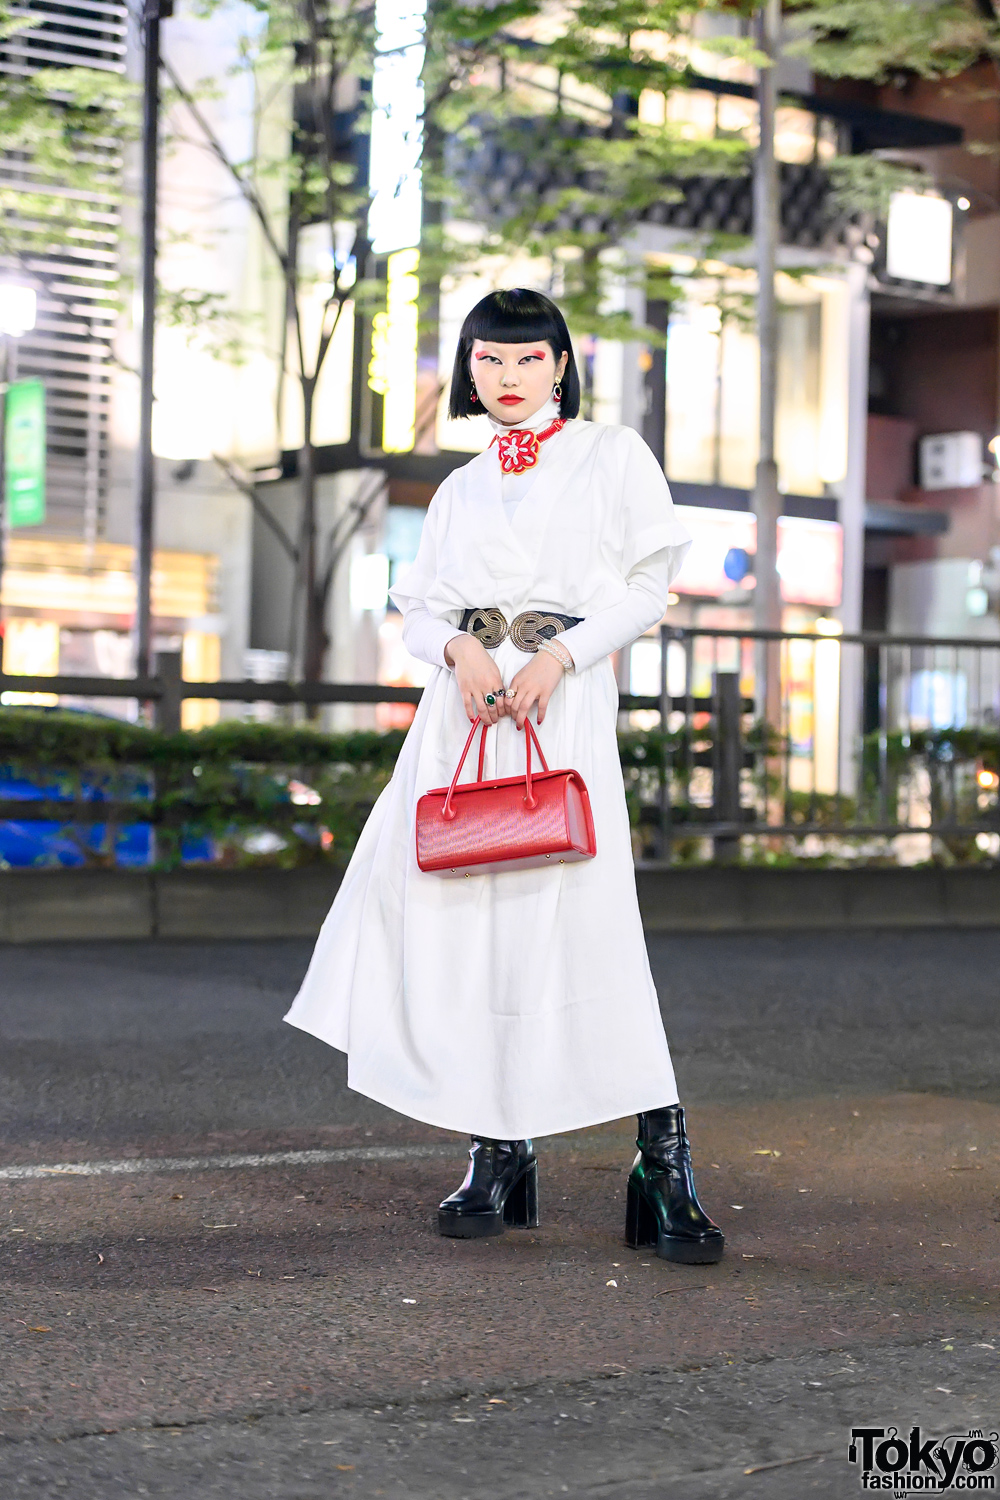 Tokyo Fashion on X: 19-year-old Japanese fashion and beauty